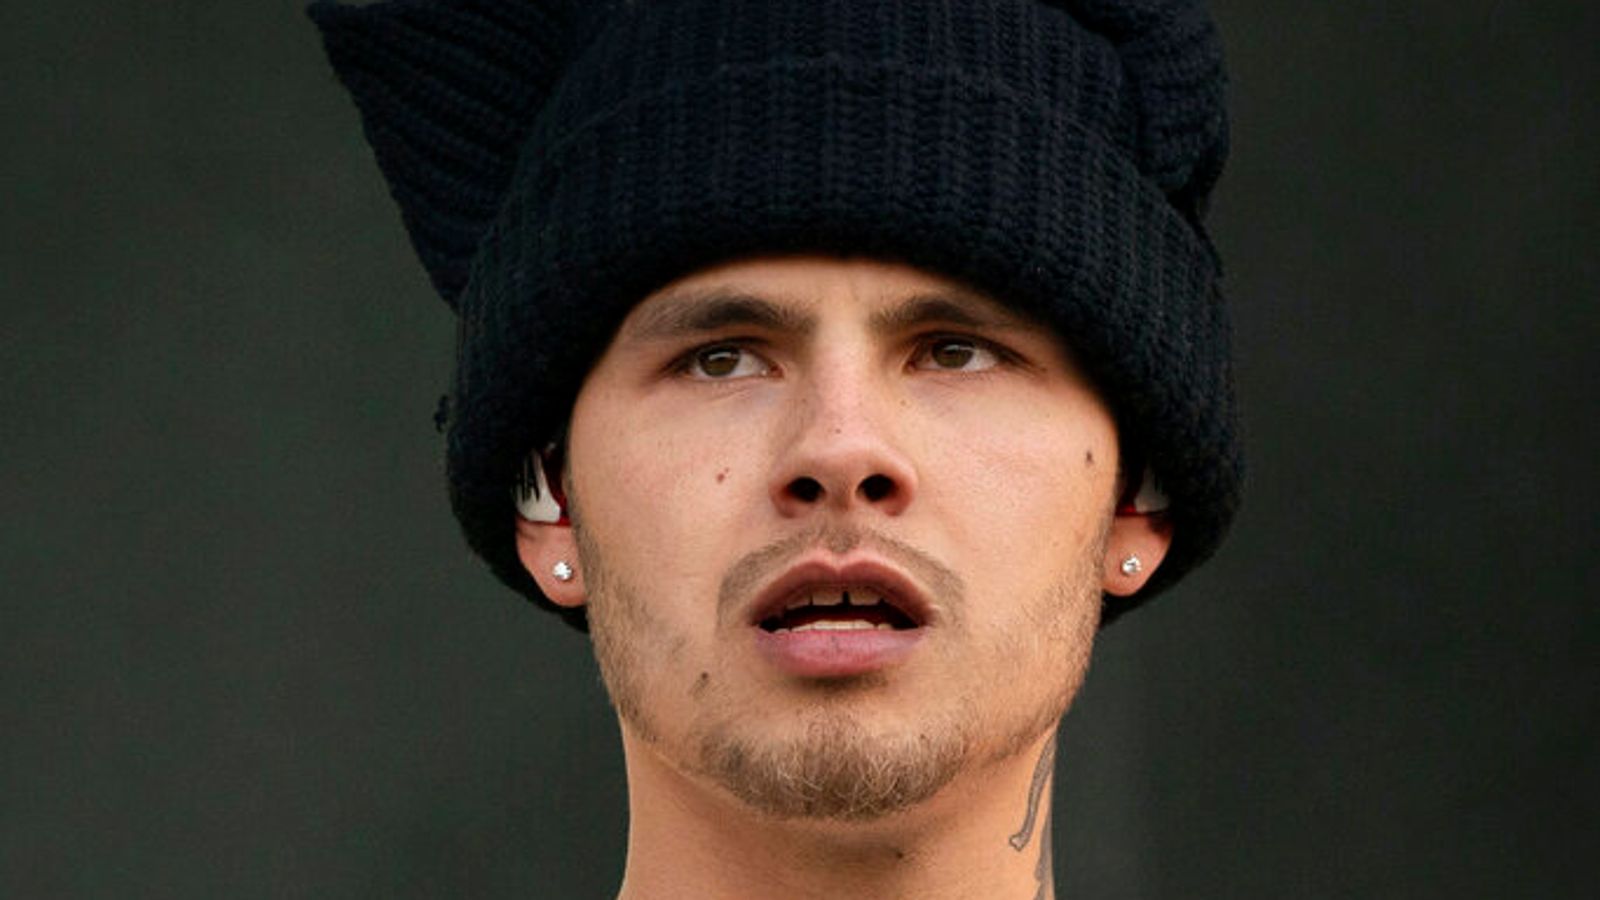 British rapper Slowthai appears in court charged with rape | Ents & Arts News